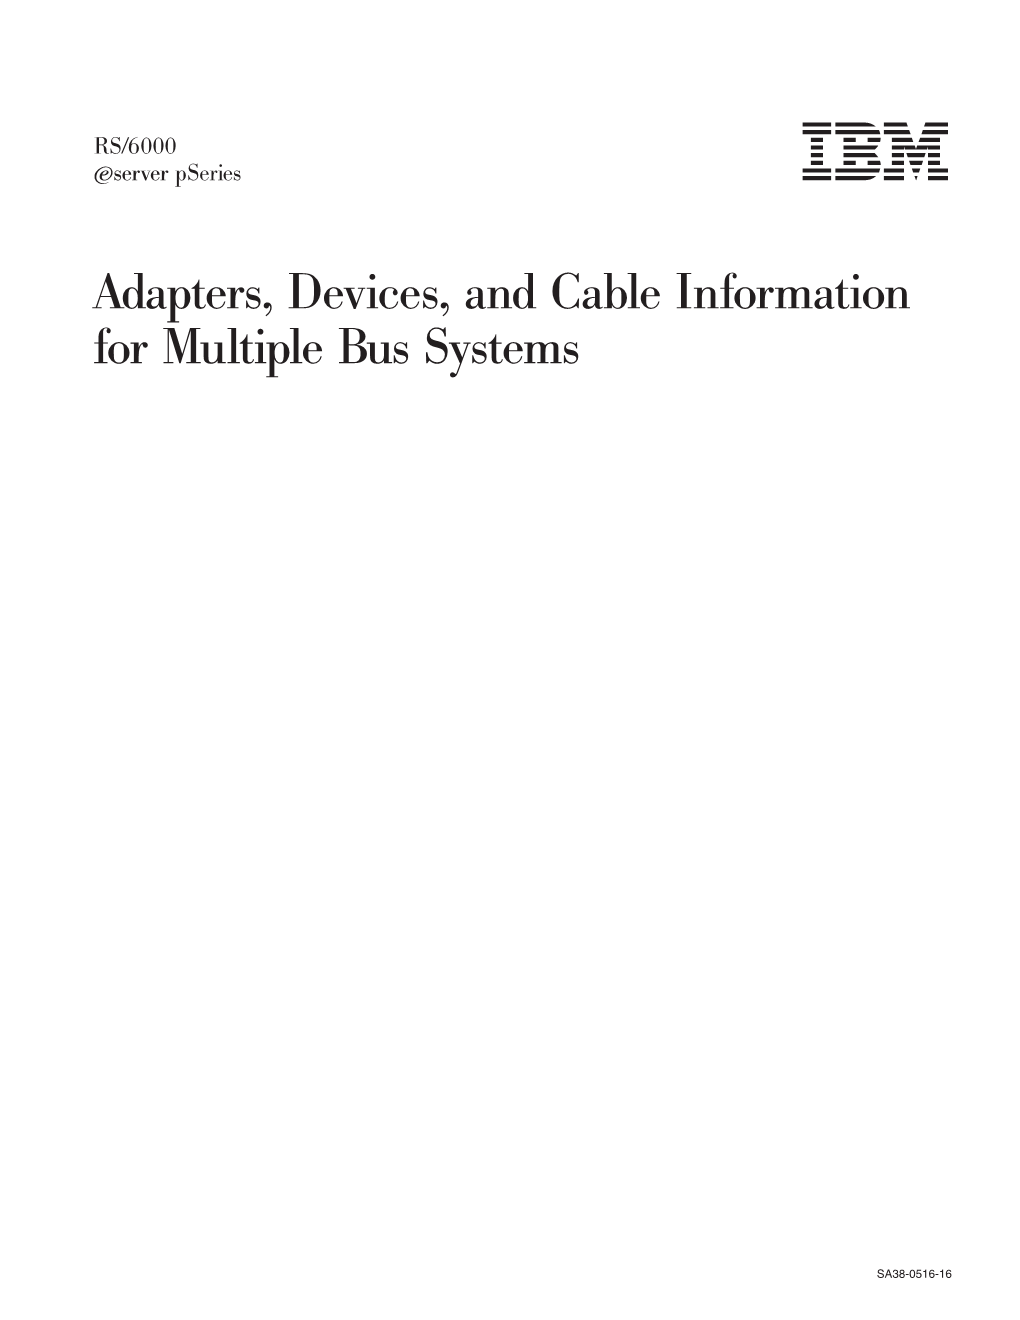 Adapters, Devices, and Cable Information for Multiple Bus Systems